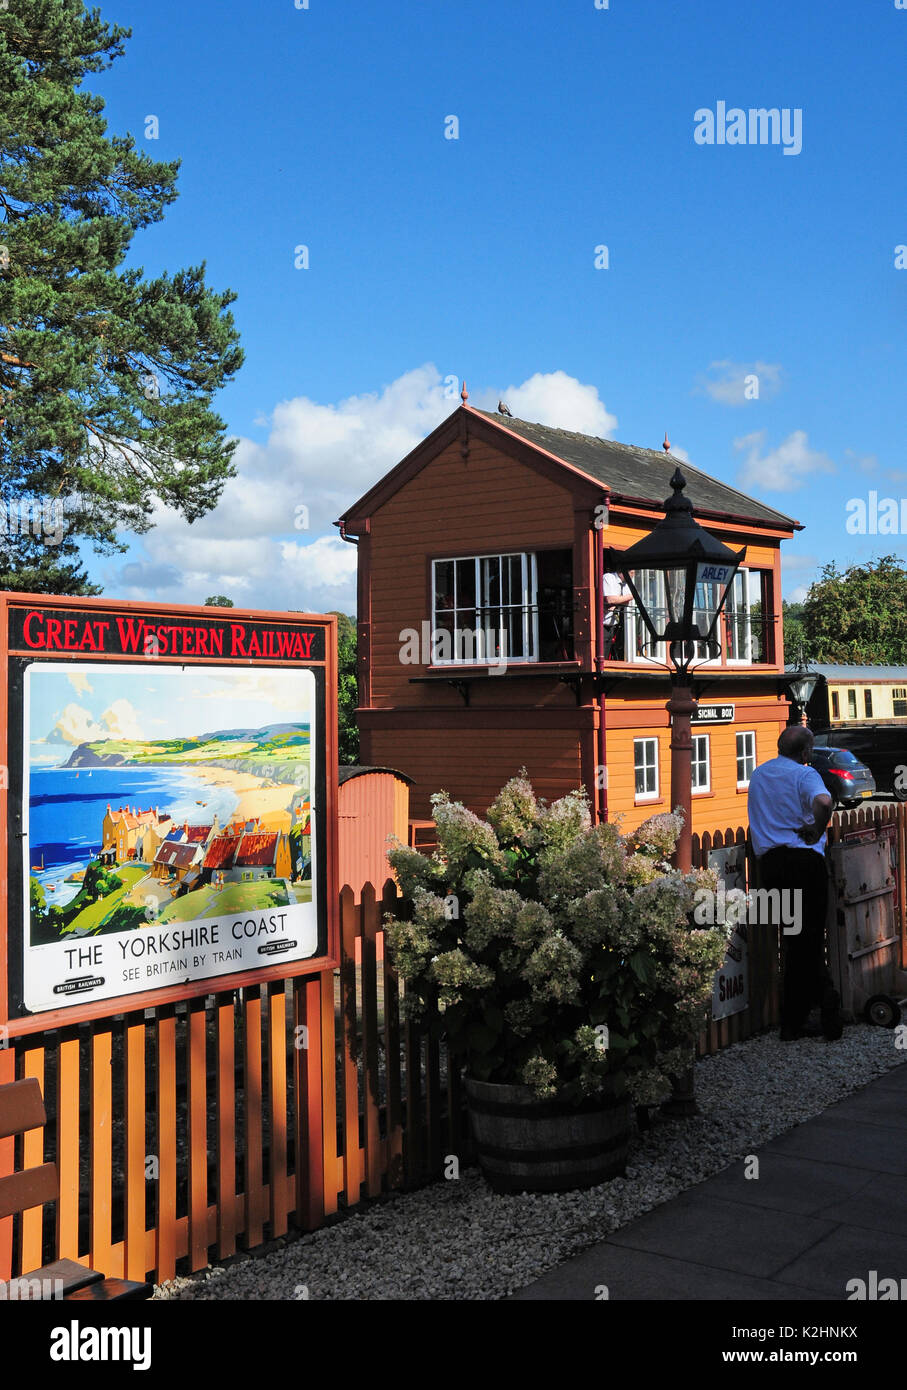 Signal box, preserved Great Western Railway poster and lamp at Arley on Severn Valley Railway, Shropshire. Stock Photo